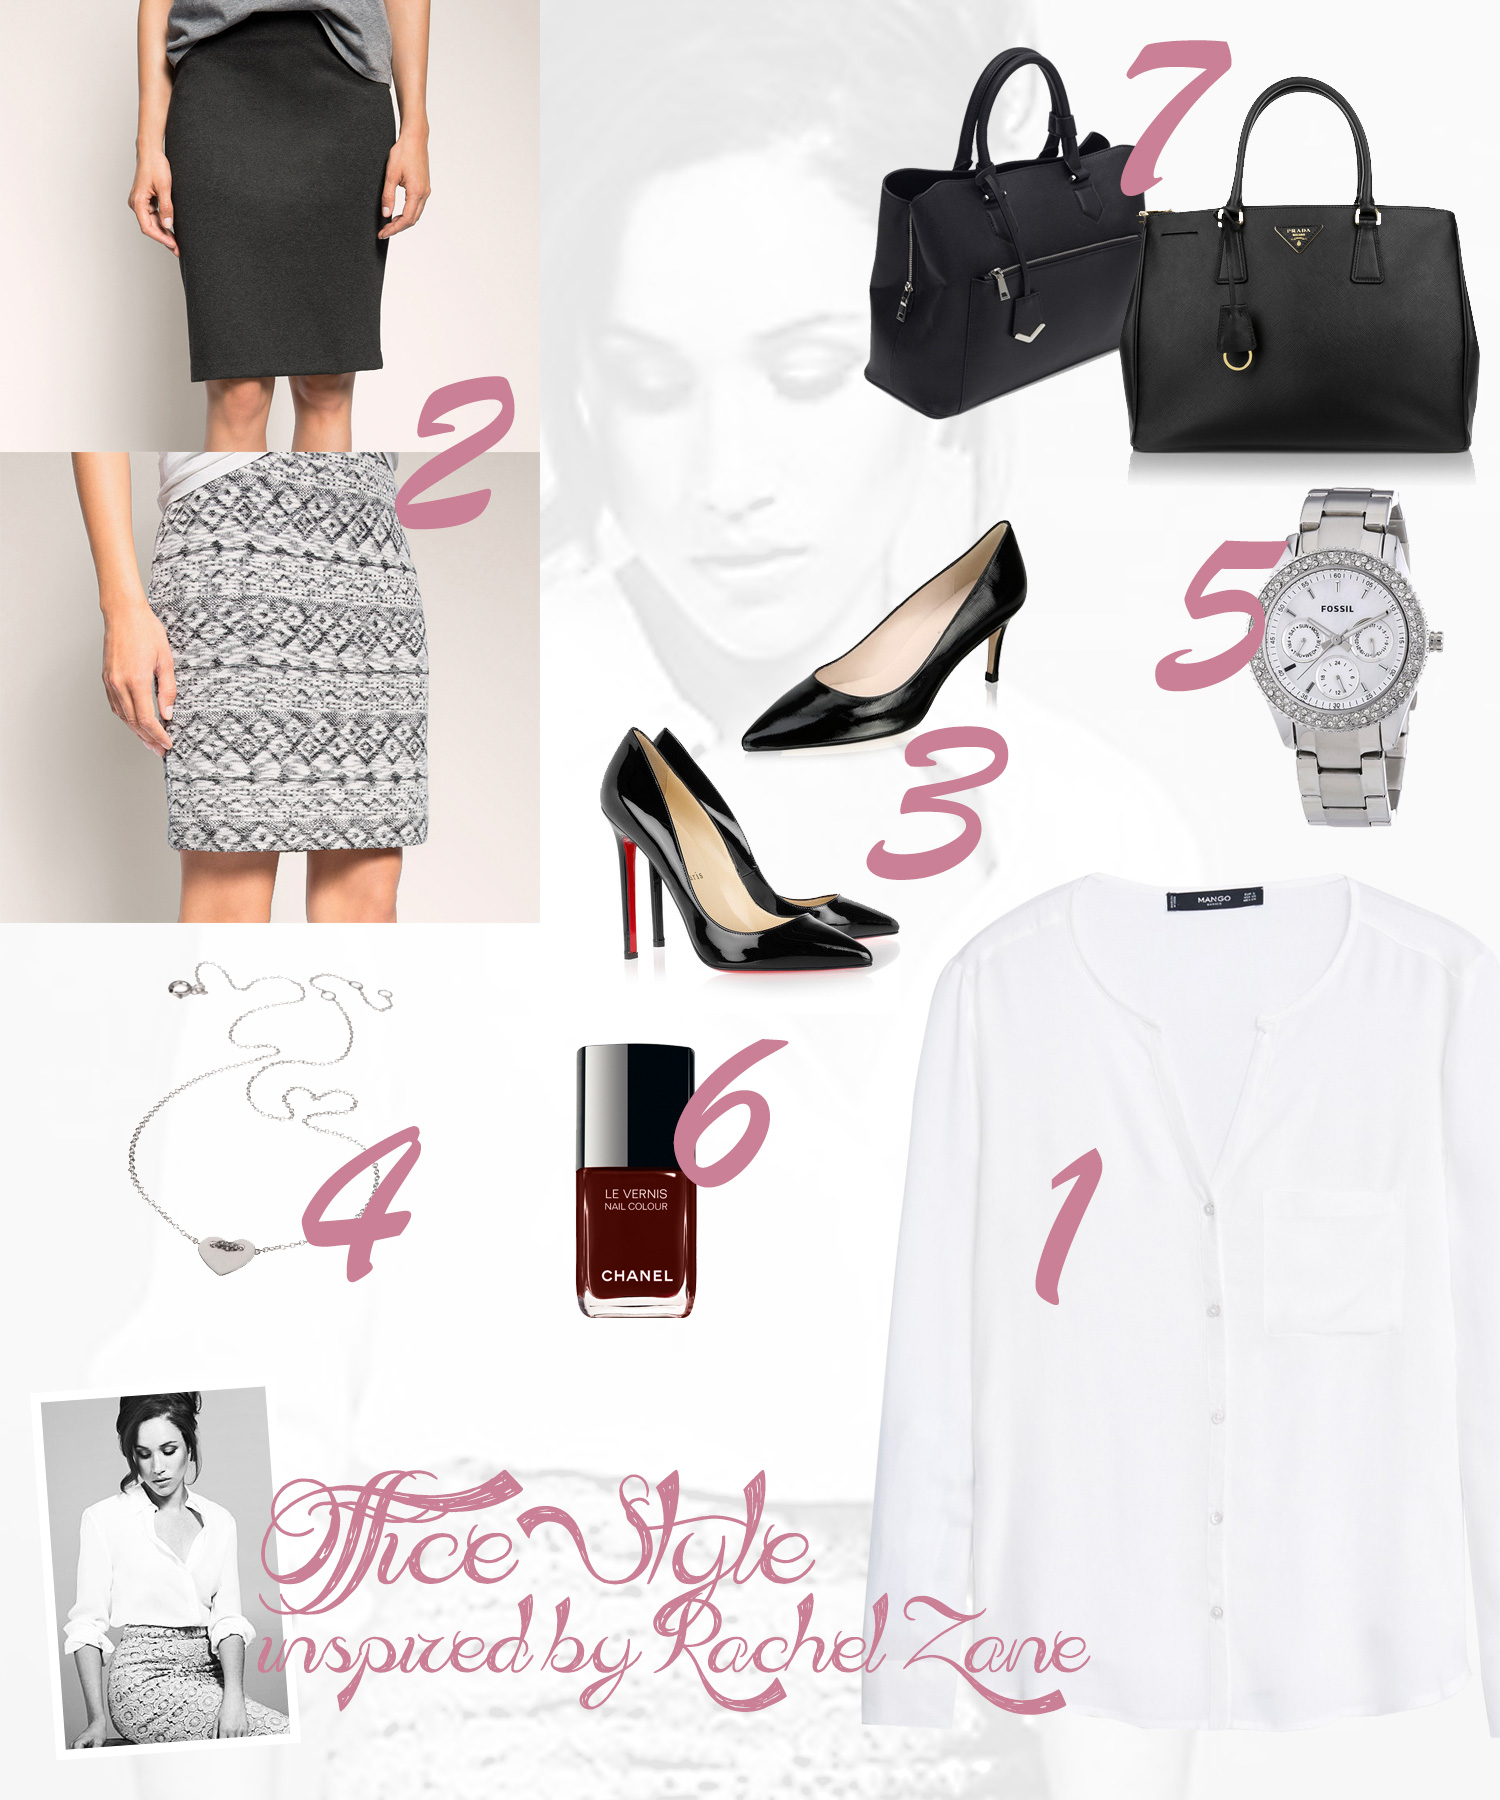 Fashion Tuesday: Office Style inspired by Rachel Zane (Suits)